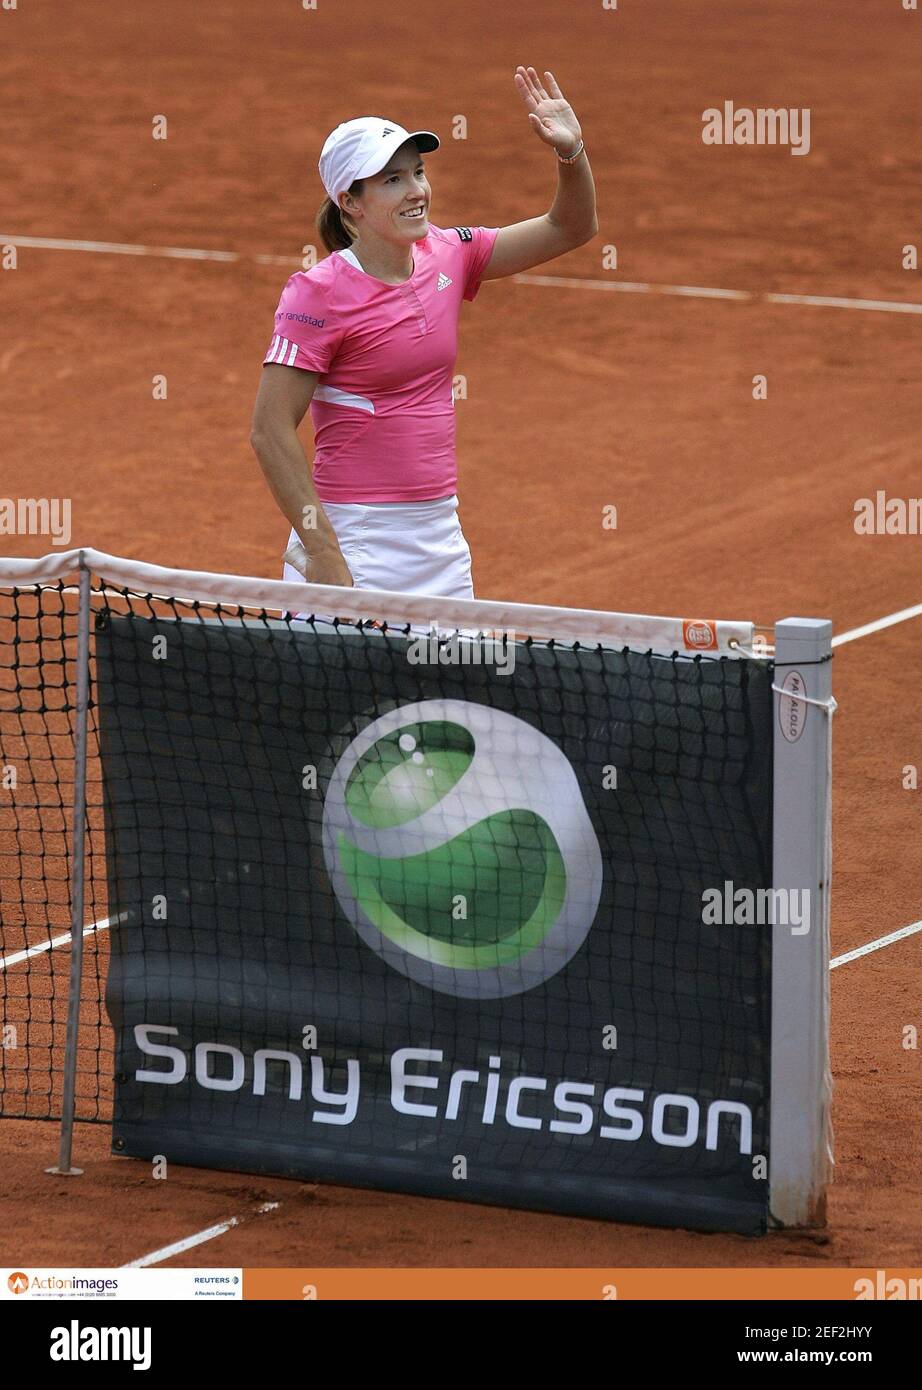 Tennis - Sony Ericsson WTA Tour - Qatar Telecom German Open - Berlin,  Germany - 9/5/07 Justine Henin of Belgium waves to the crowd after  defeating Tatjana Malek of Germany during their